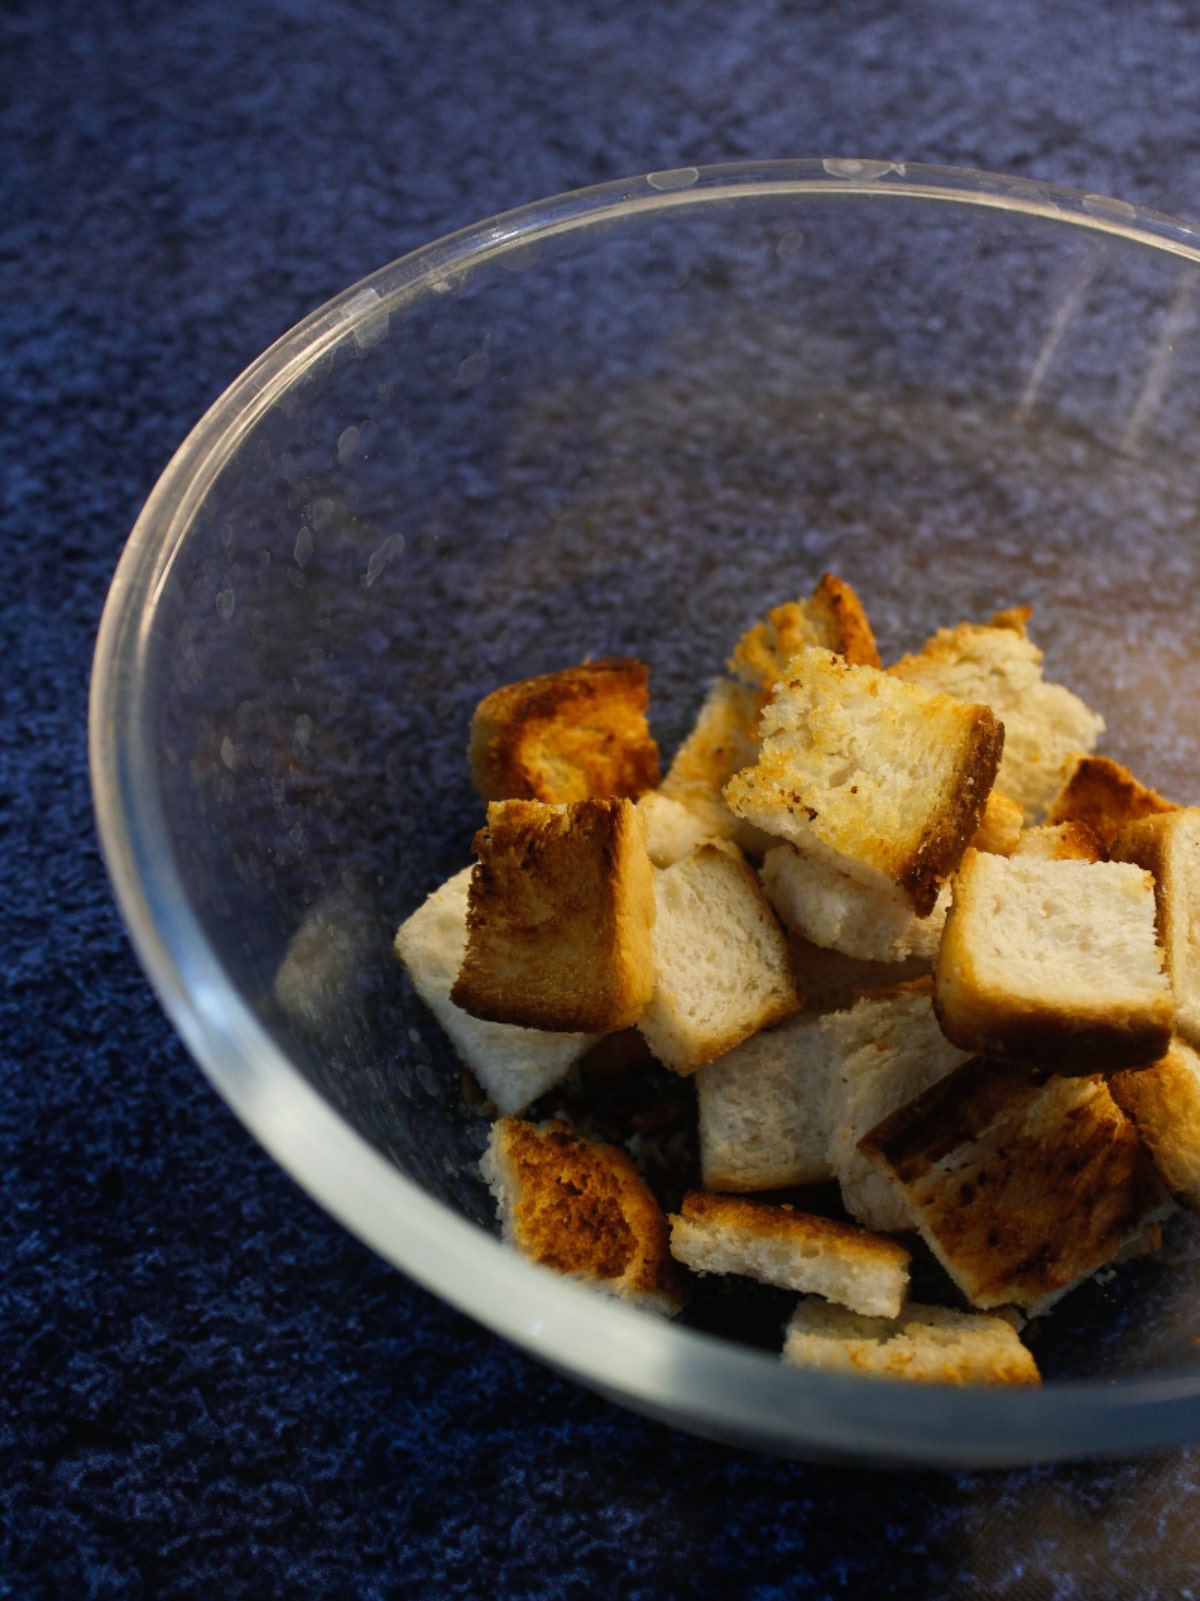 Transfer the bread cubes into the bowl and keep aside